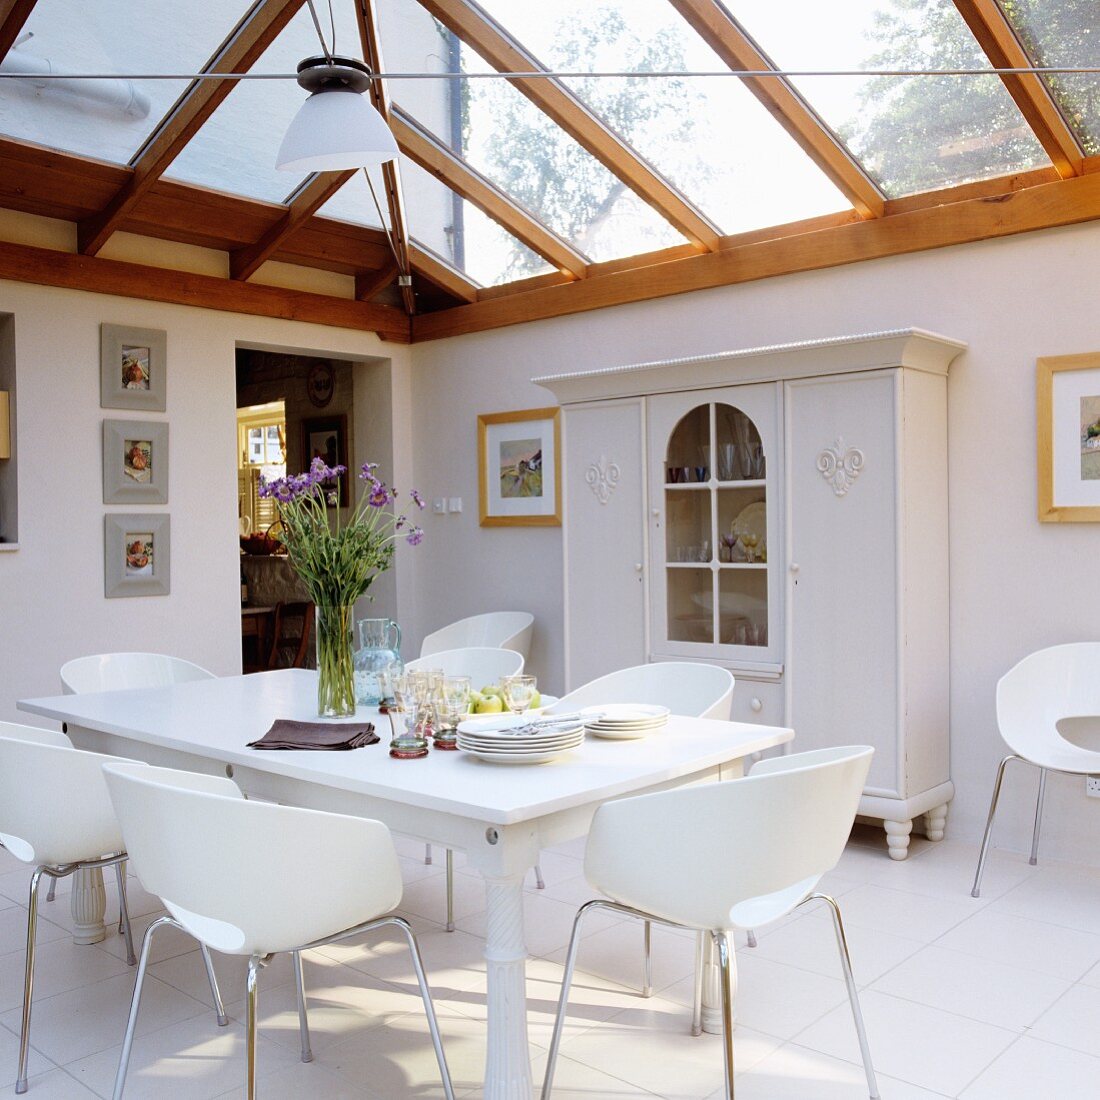 Modern, white shell chairs at dining table in front of farmhouse cupboard in extension with wood and glass roof structure